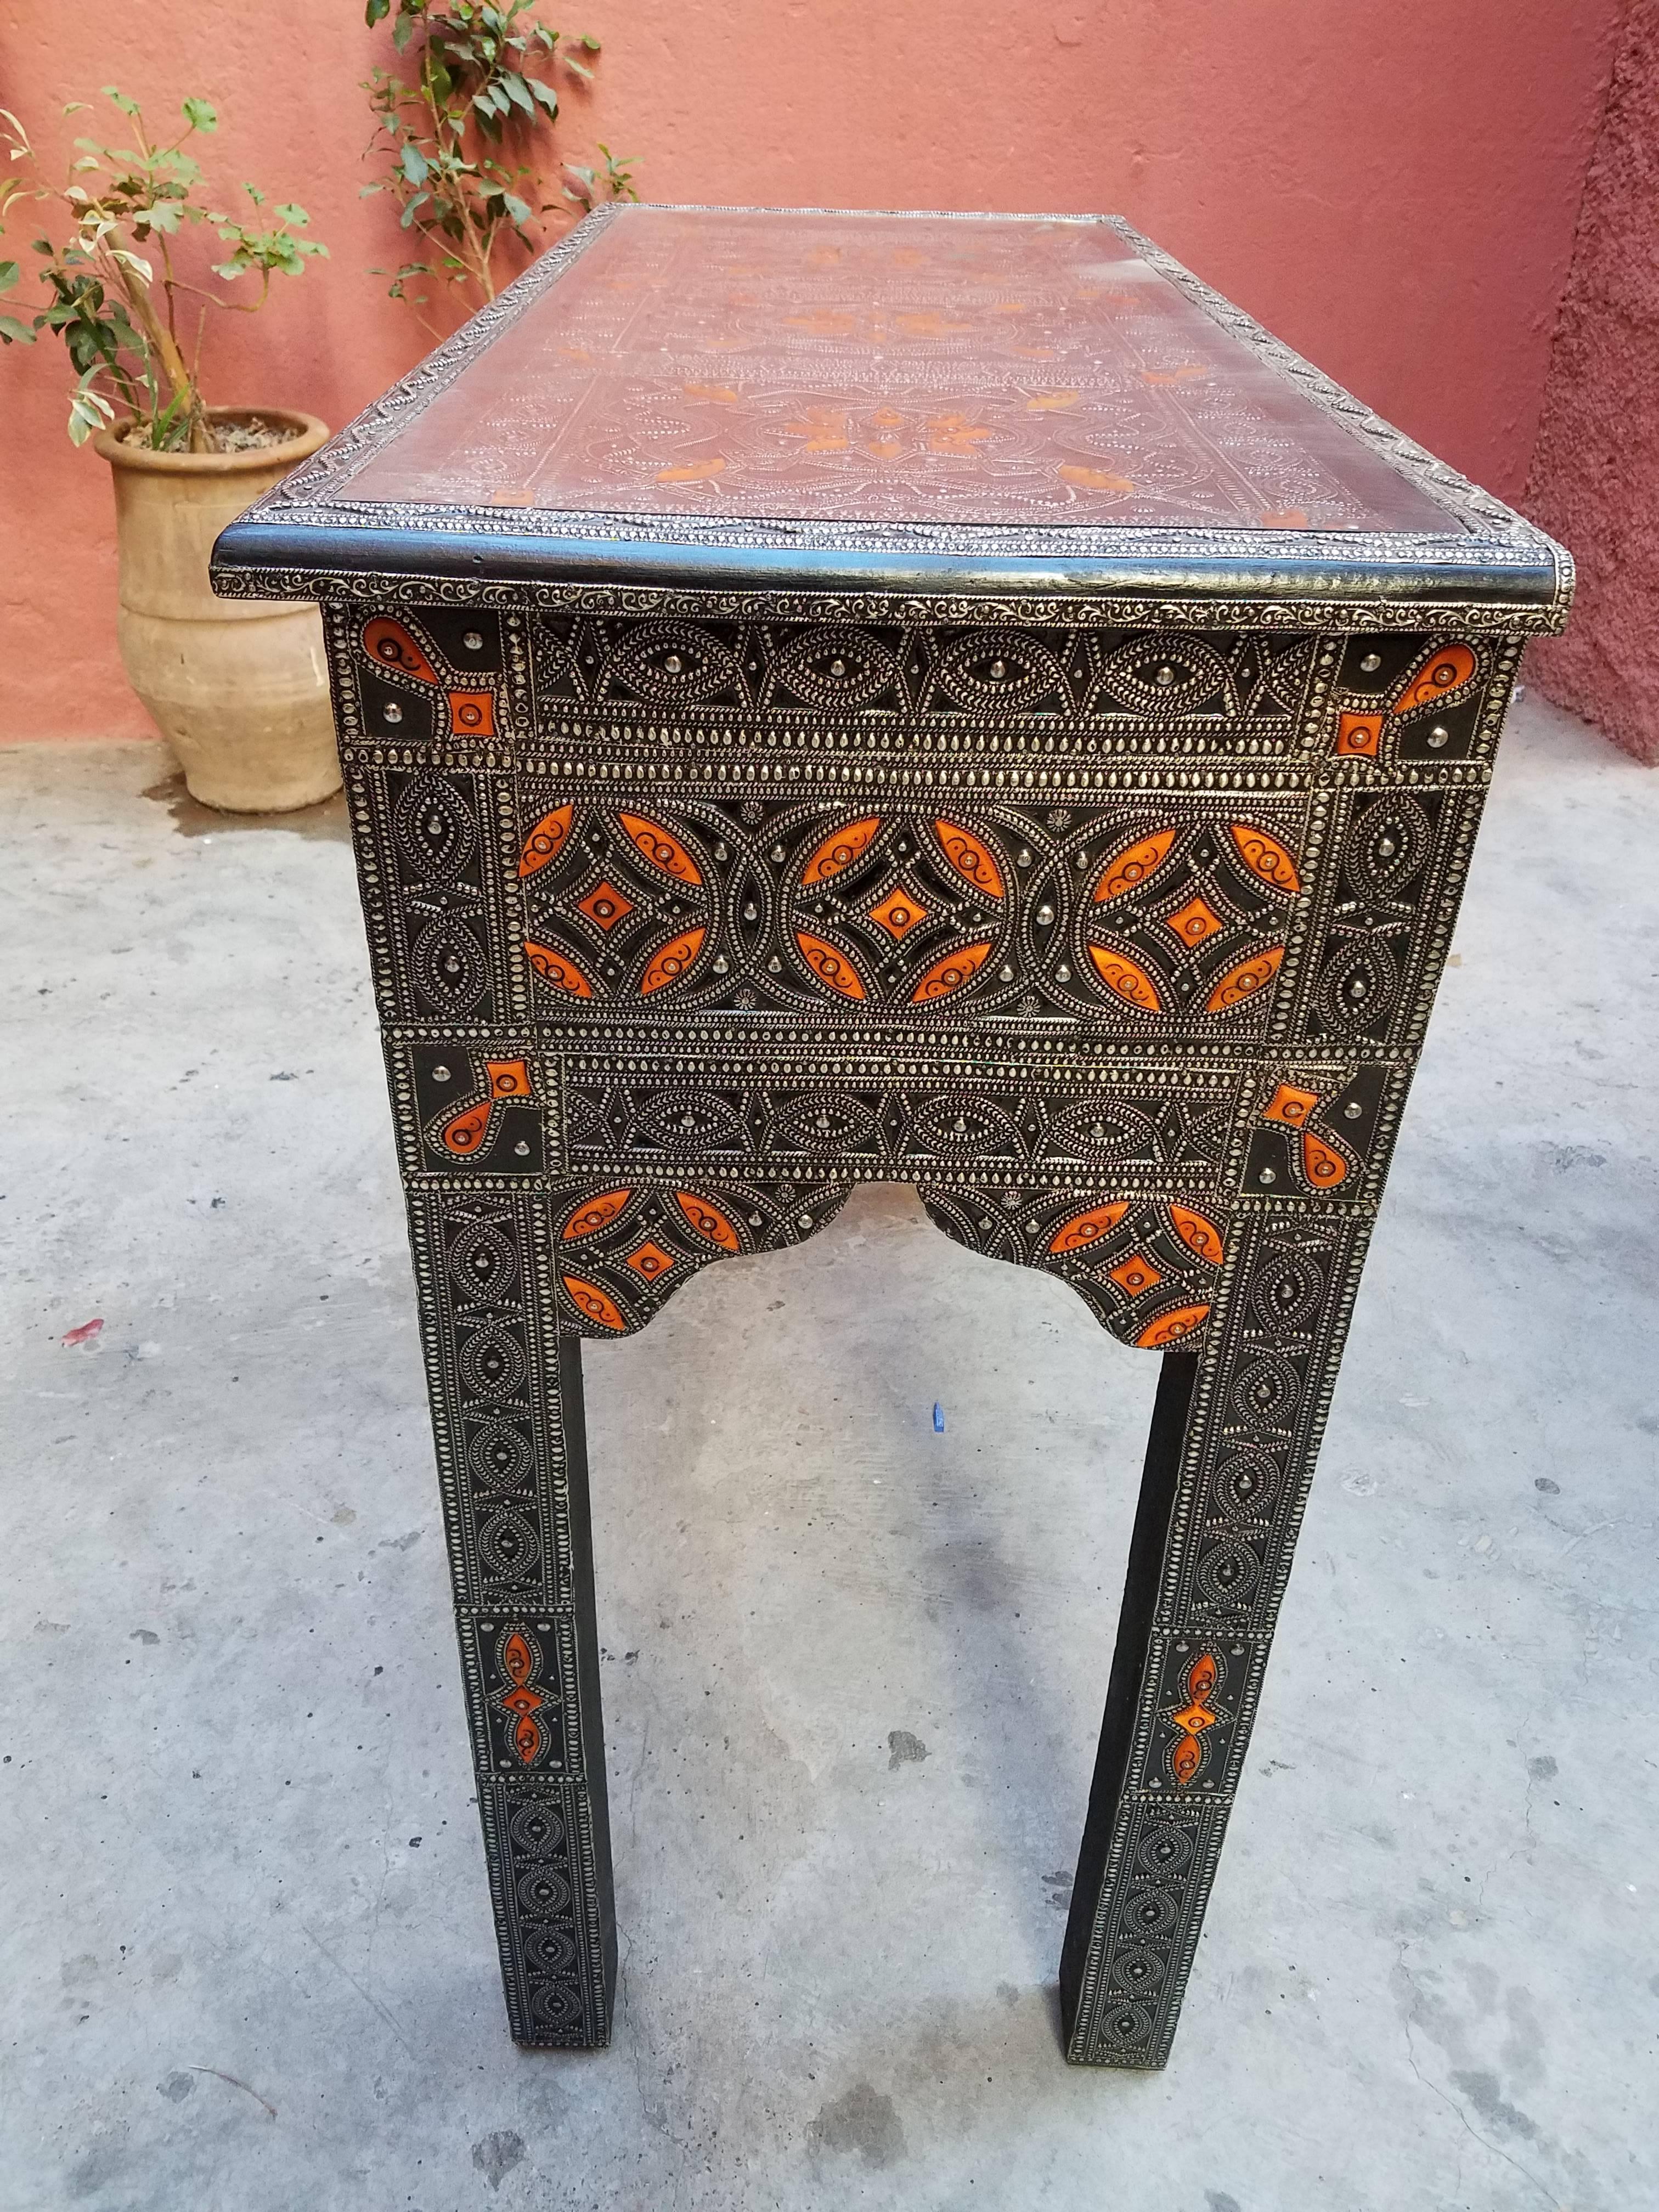 Moroccan Camel Bone and Metal Inlay Console Table Cedar Wood Frame In Excellent Condition For Sale In Orlando, FL